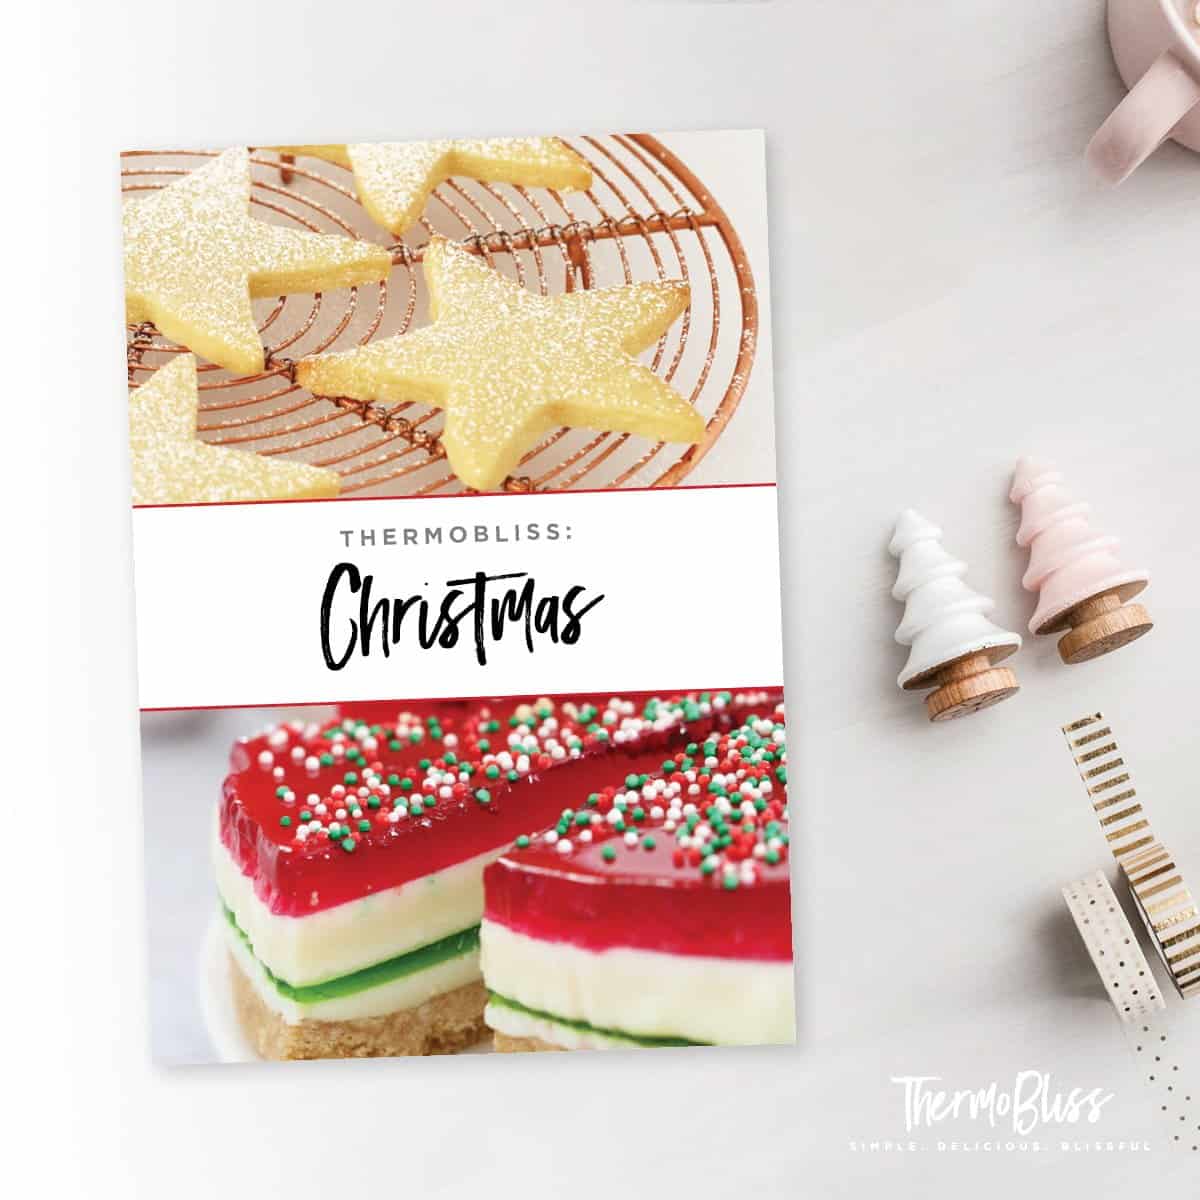 The ultimate collection of Thermomix Christmas Recipes can be found in our Thermomix Christmas Cookbook! RRP $16.95 (includes a hadcopy printed cookbook plus a free eBook version).